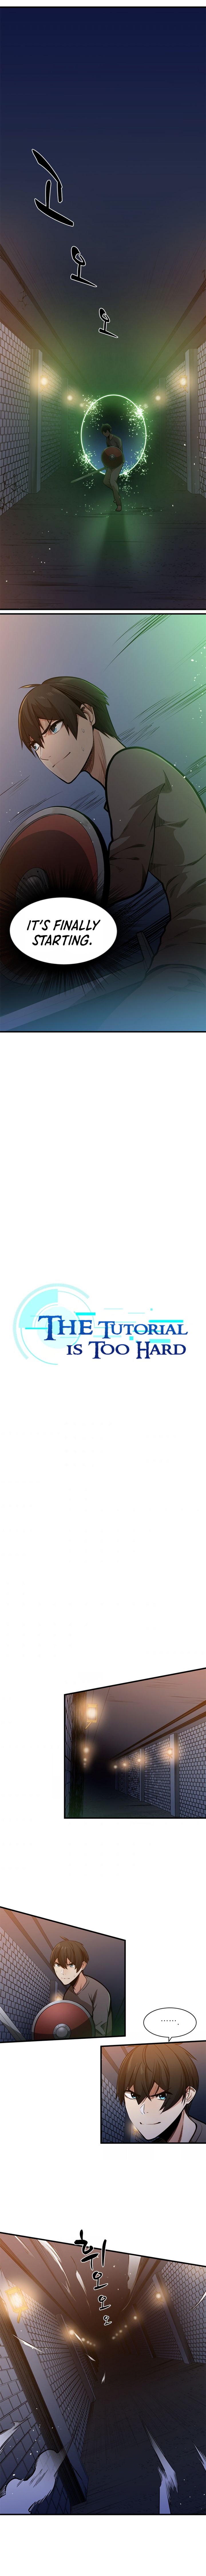 the_tutorial_is_too_hard_4_1